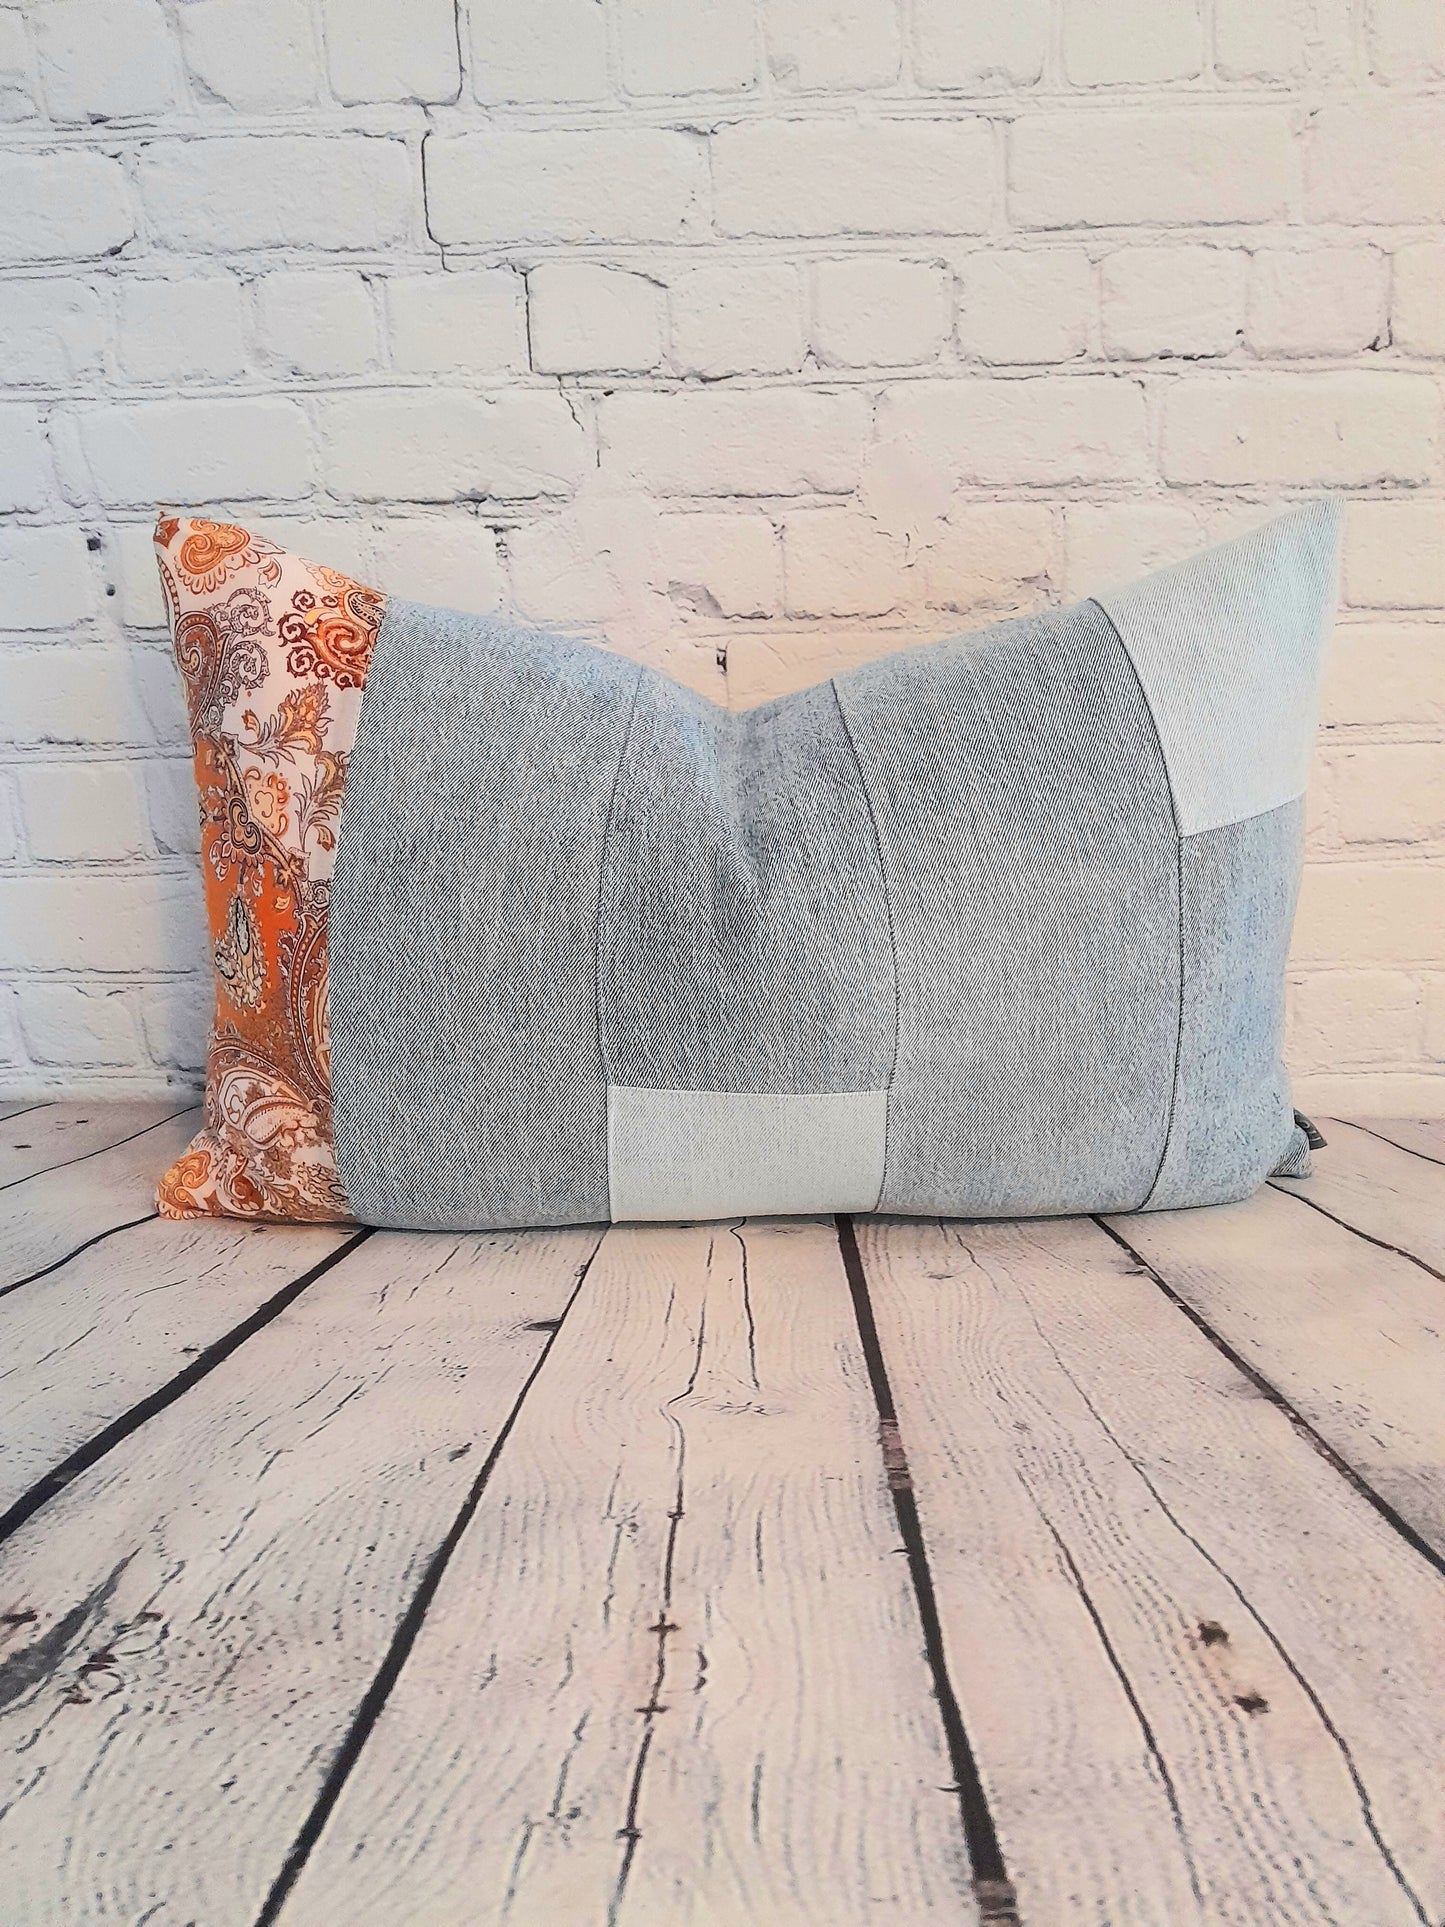 Patchwork denim and vintage fabric bolster cushion cover